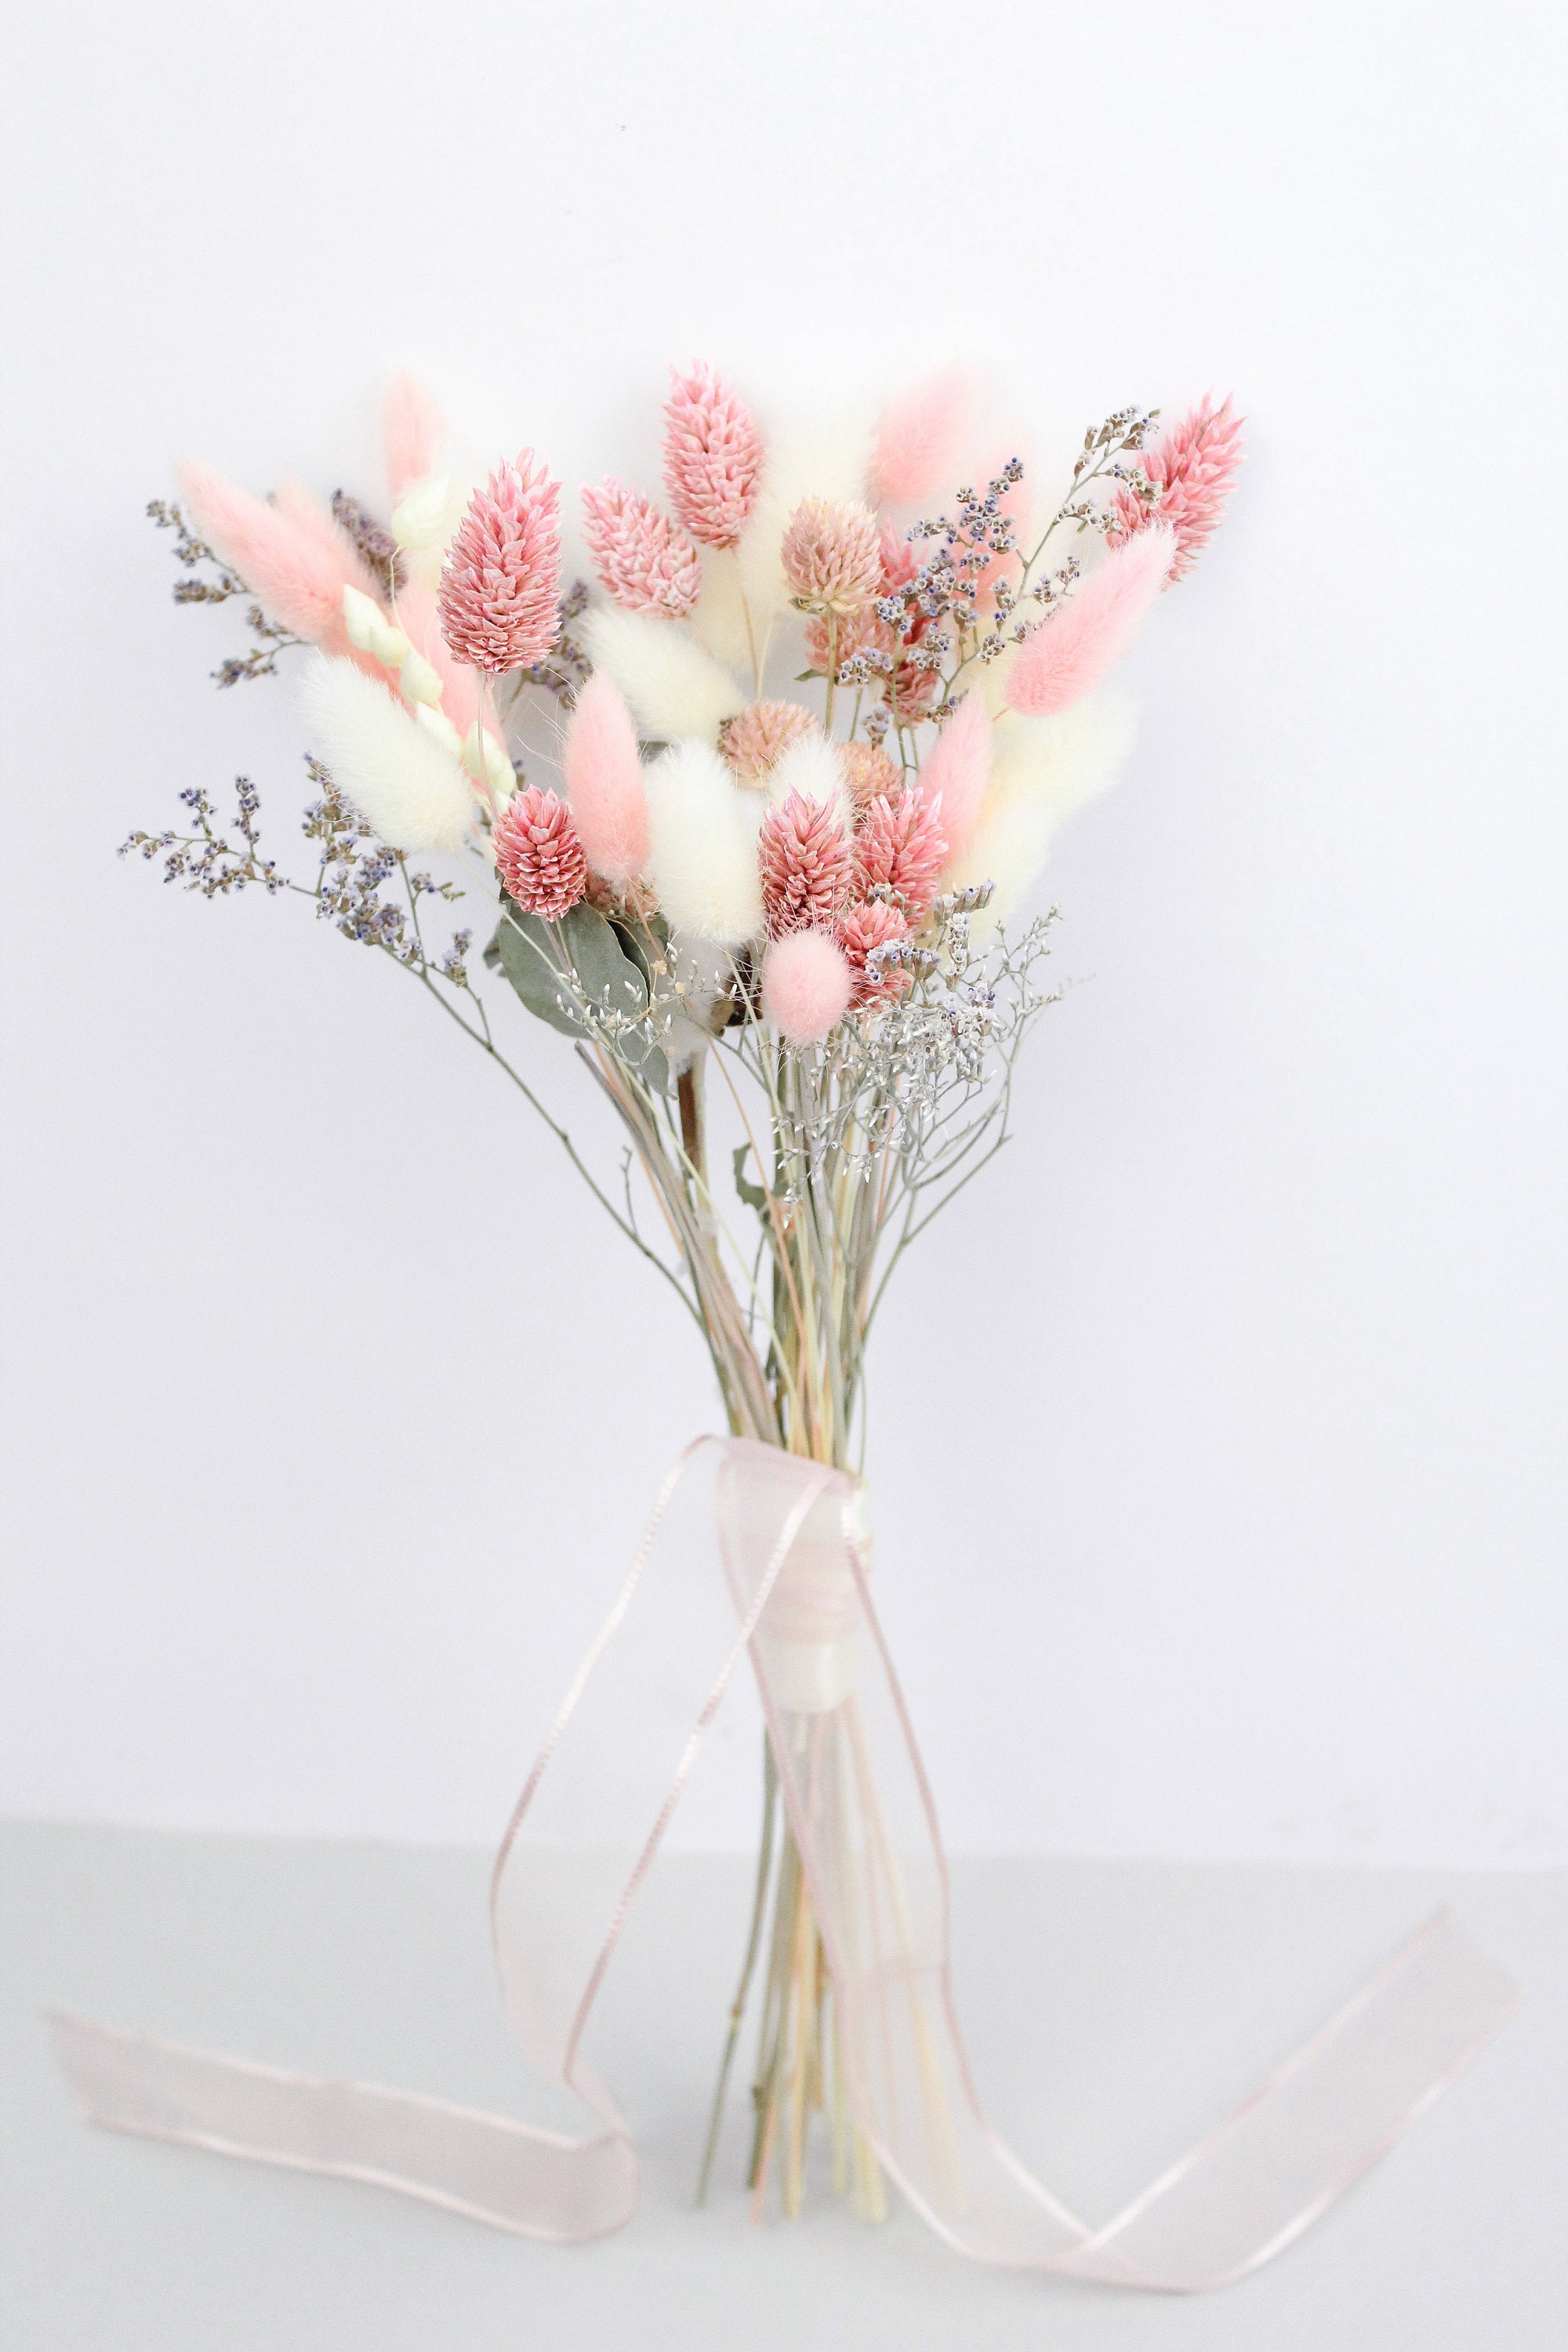 Wedding Bouquet Set, Pink and White Dried Flower Bouquet, Bridal